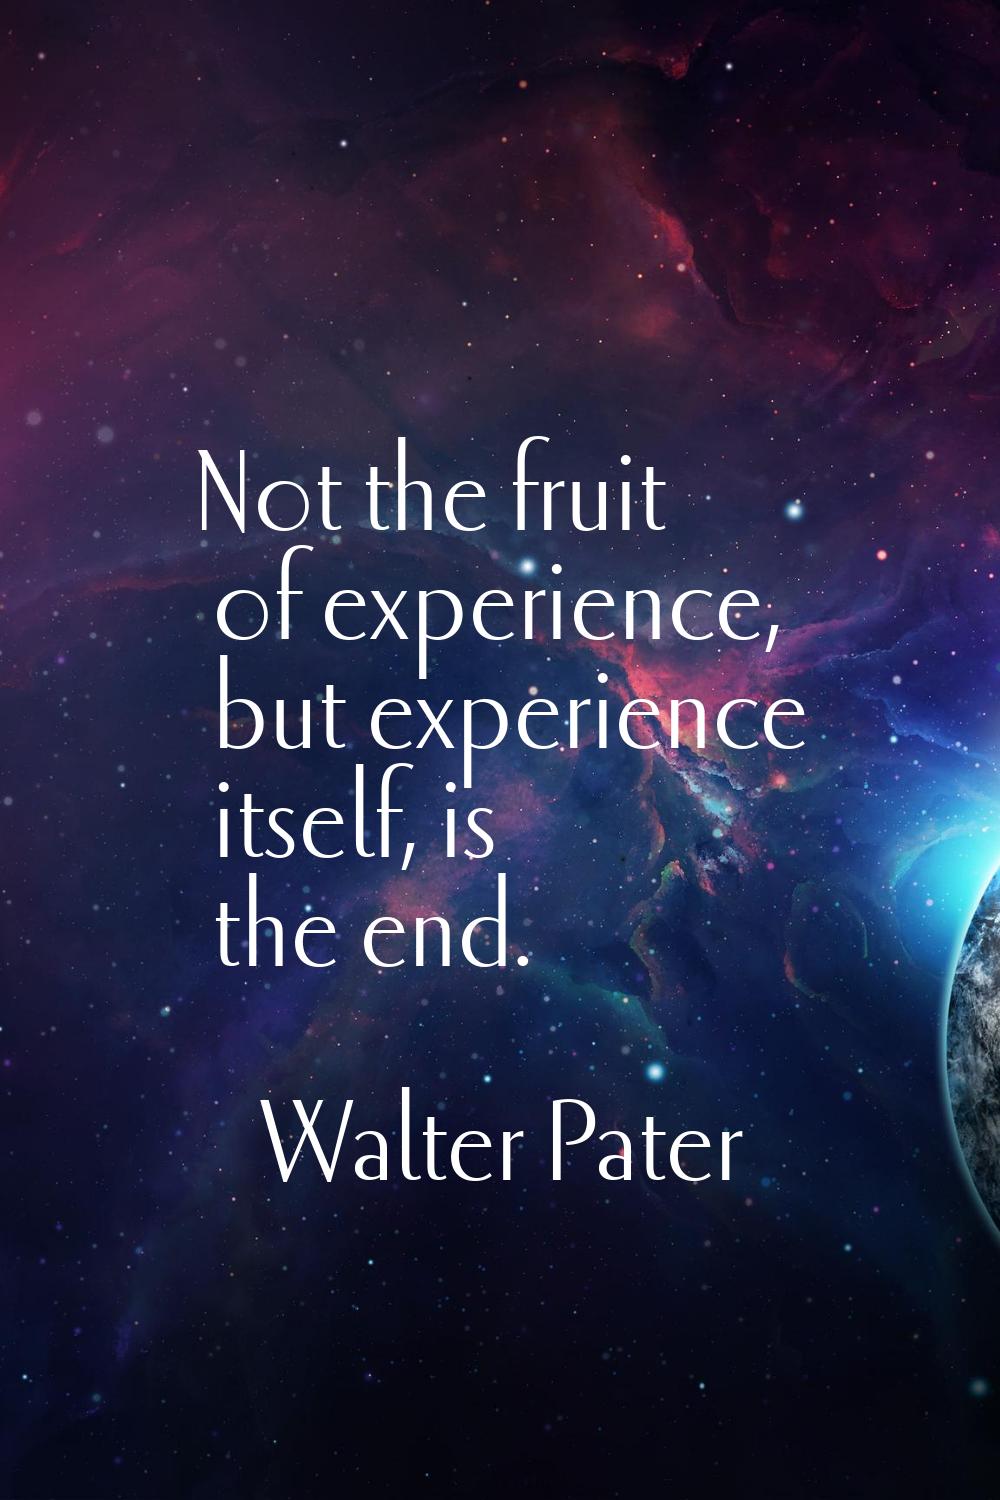 Not the fruit of experience, but experience itself, is the end.